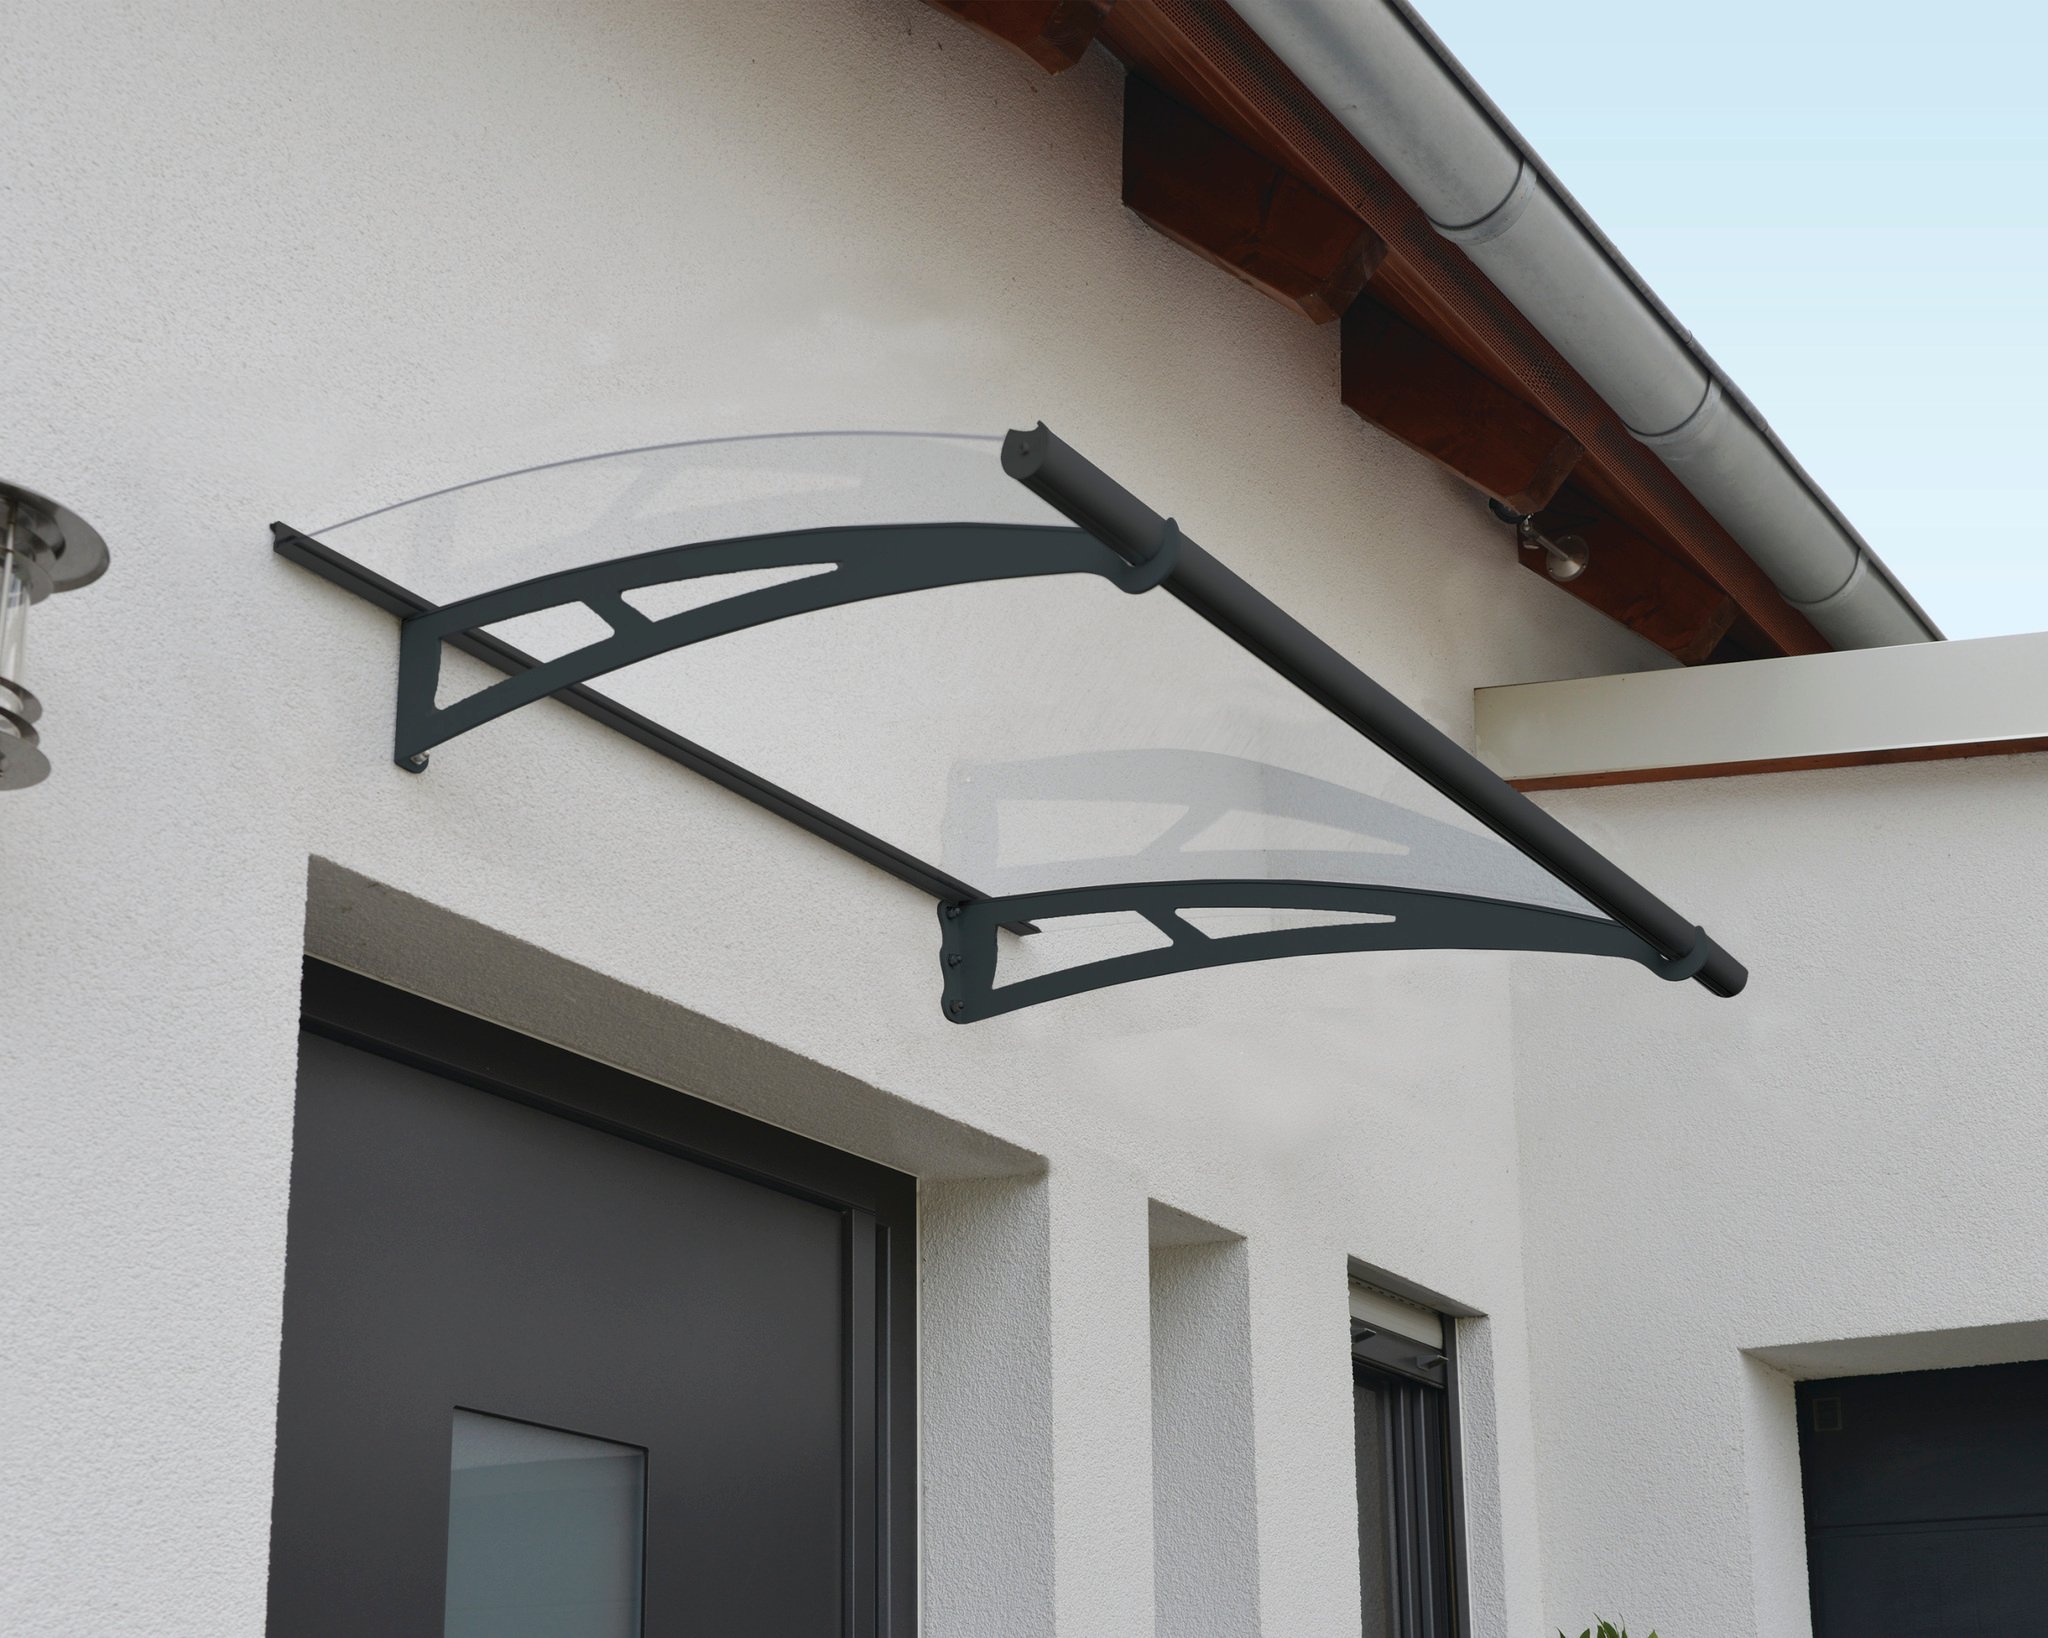 Hg9500 Aquila 1500 Awning - Clear